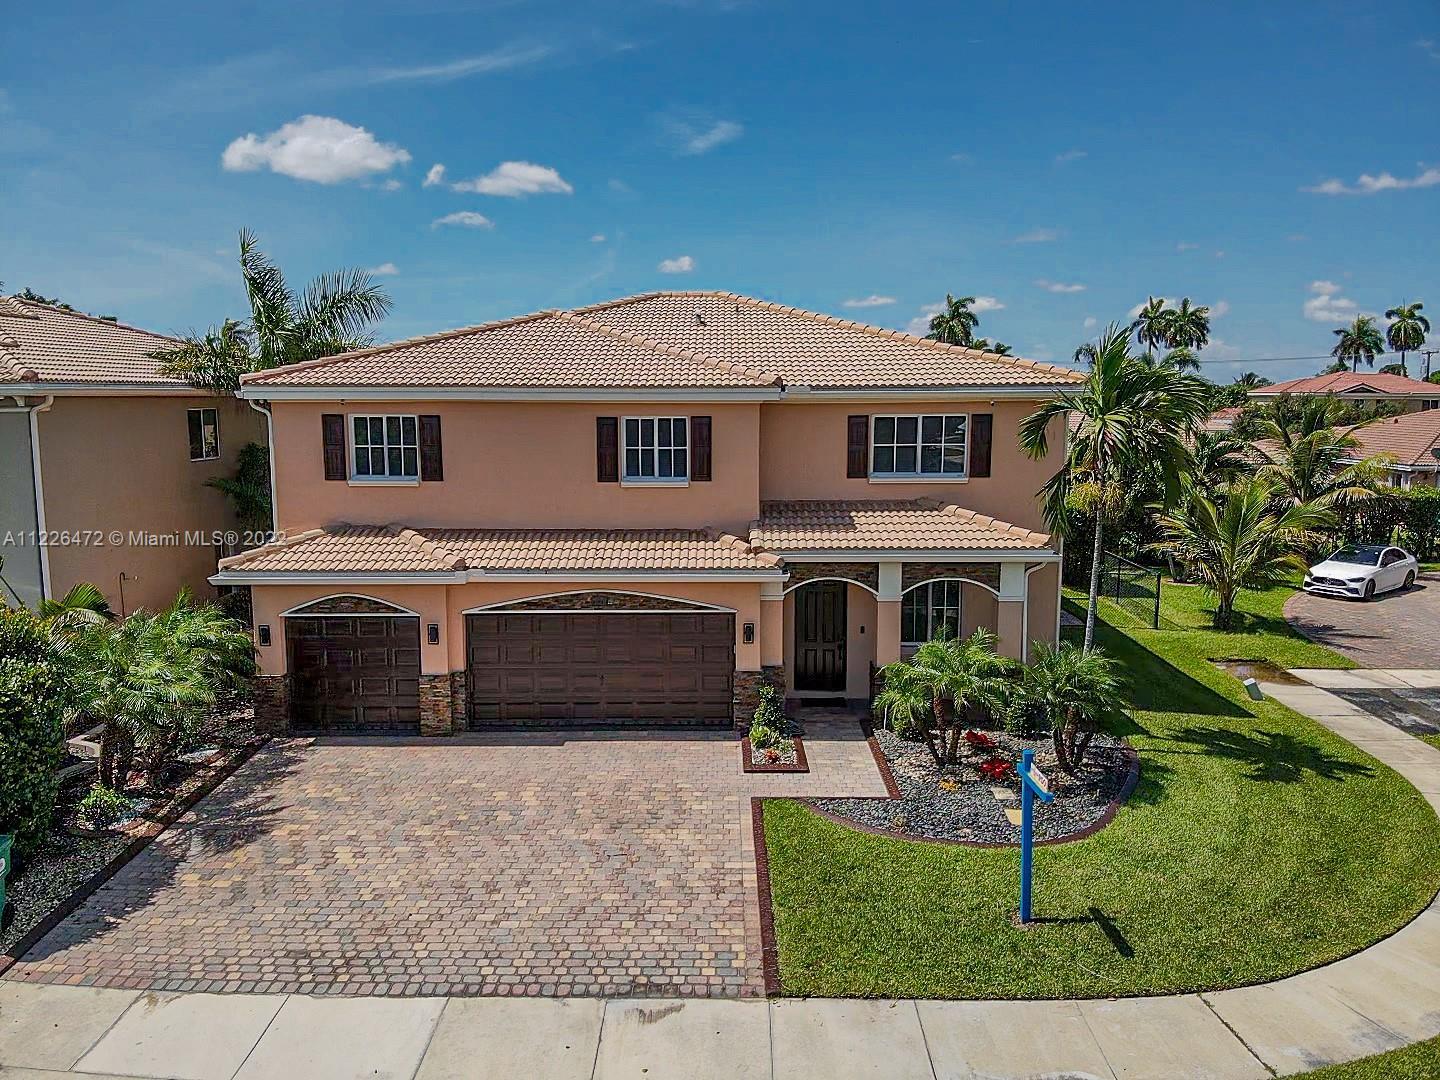 Coconut Cay  Gated Community  Highly desired  Stunning single family home , this  immaculate & well 